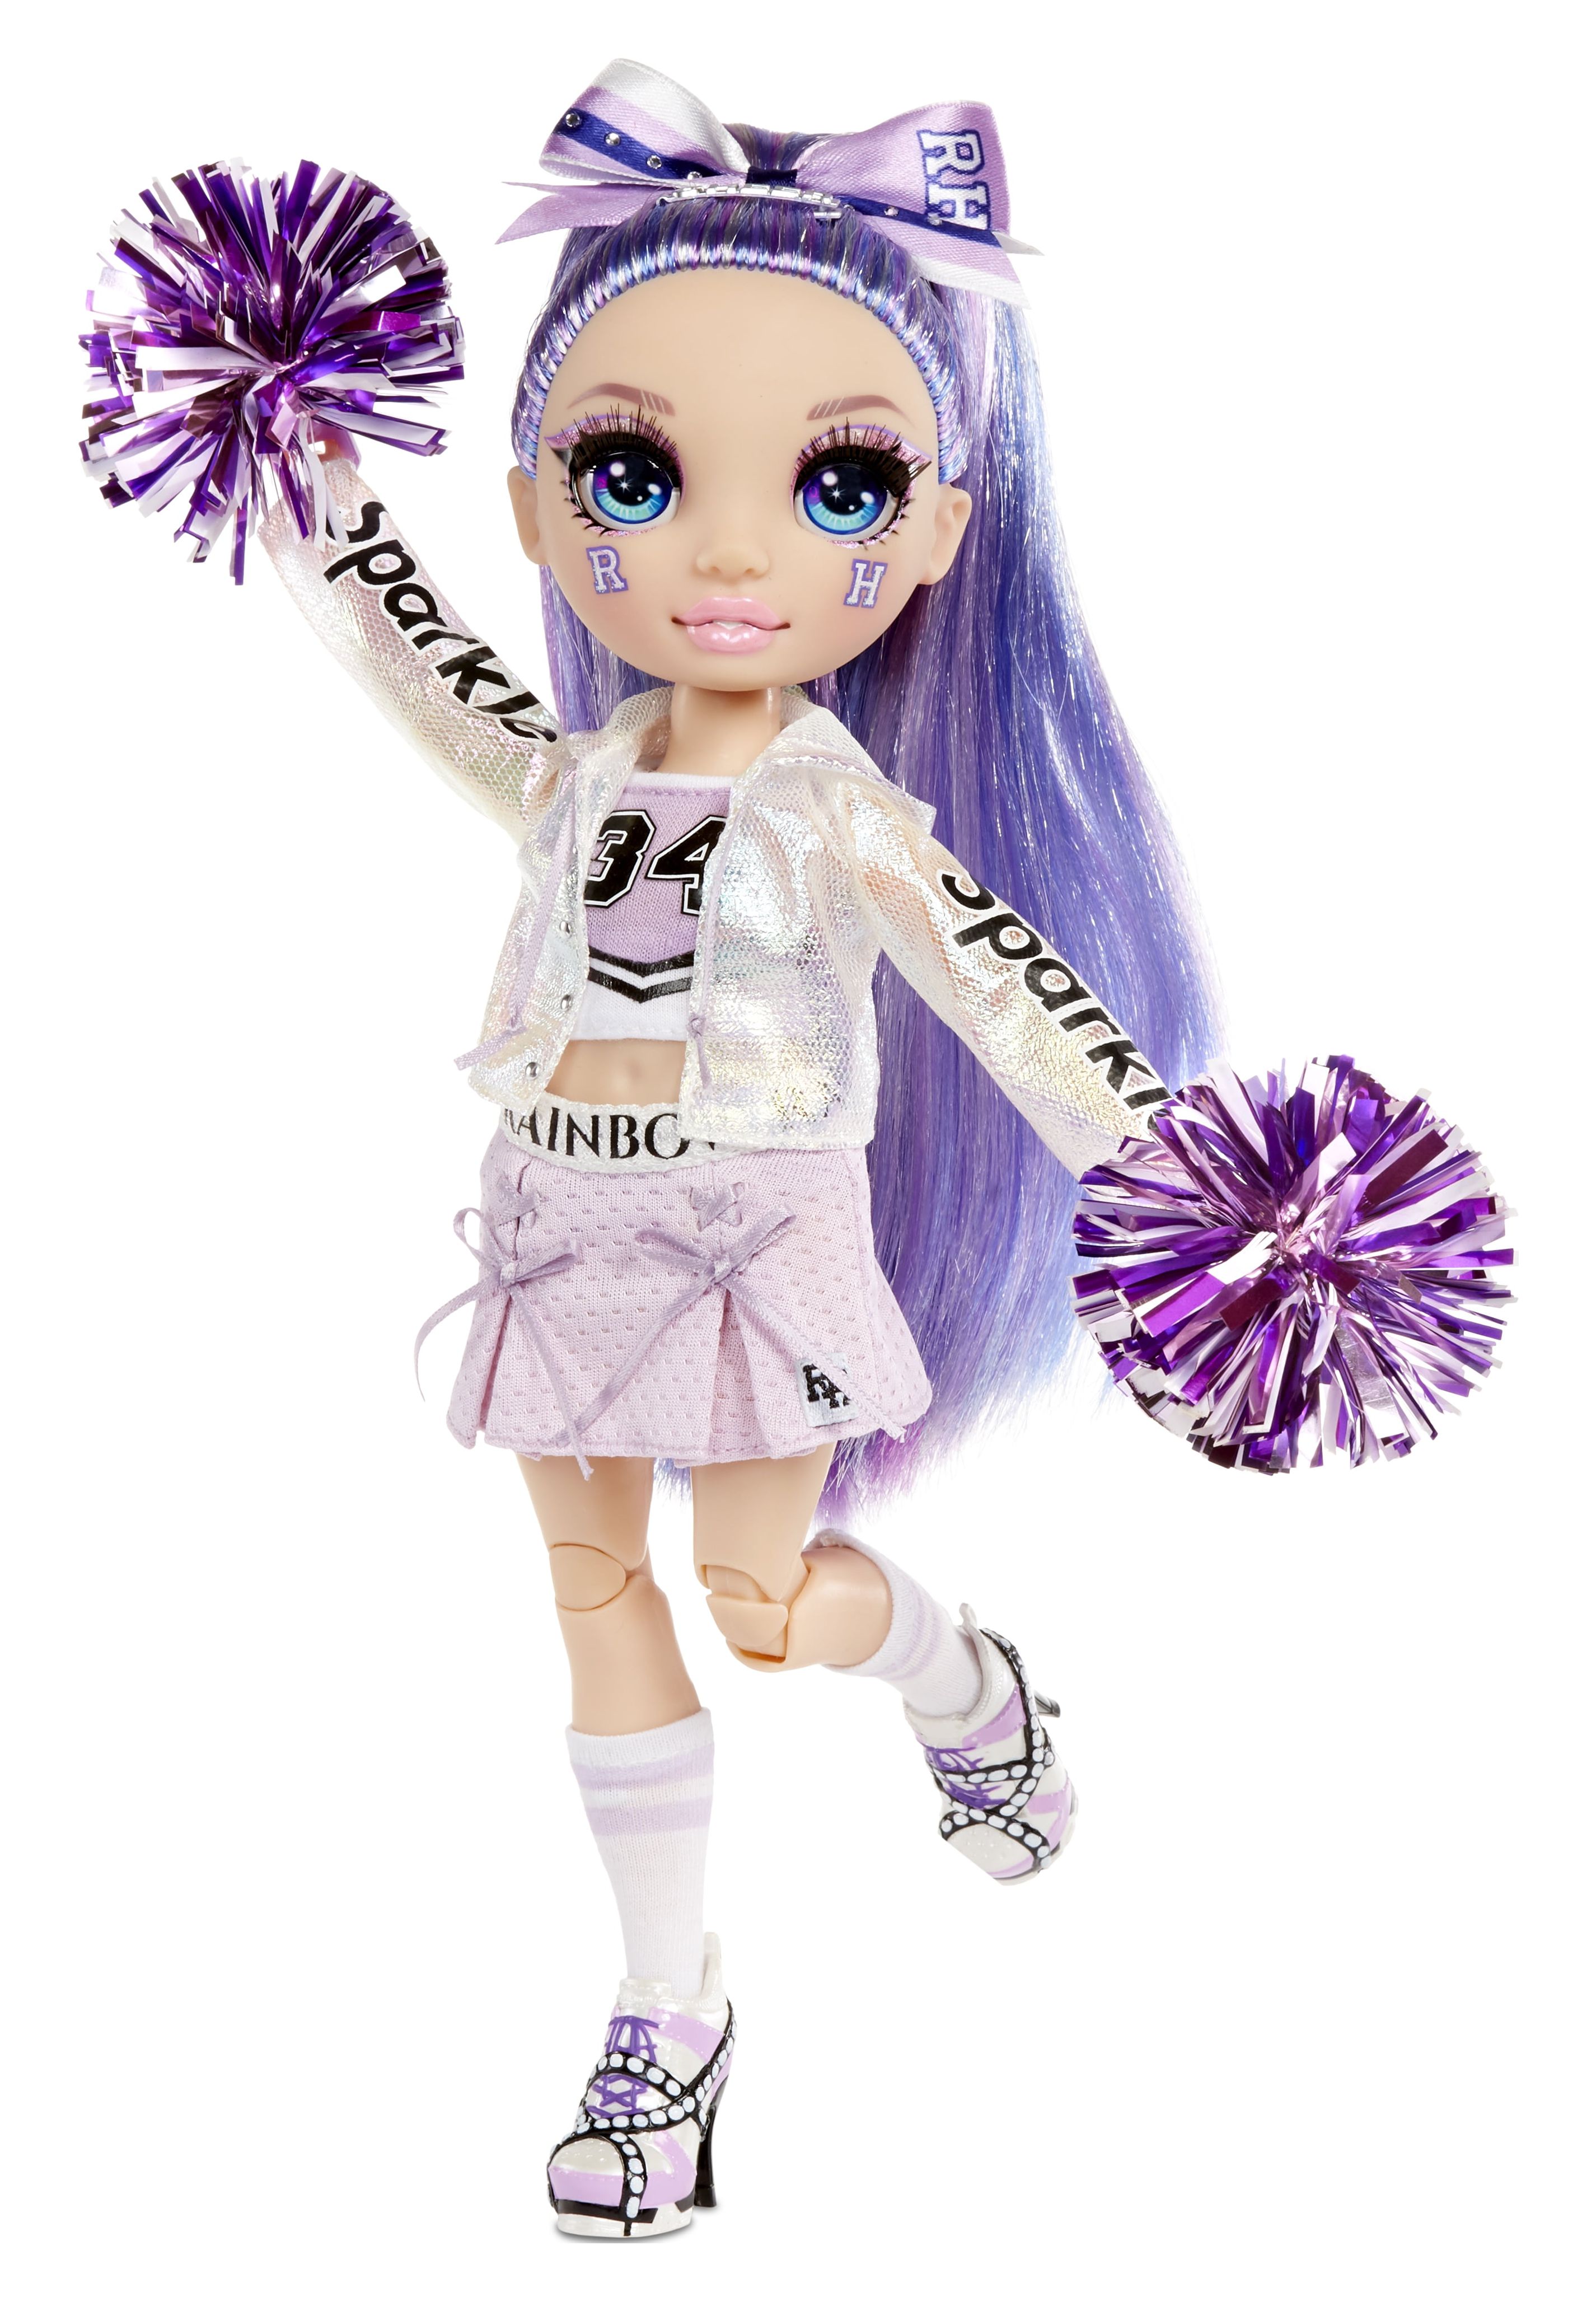 Rainbow High Cheer Violet Willow – Purple Fashion Doll with Pom Poms, Cheerleader Doll, Toys for Kids 6-12 Years Old - image 1 of 8